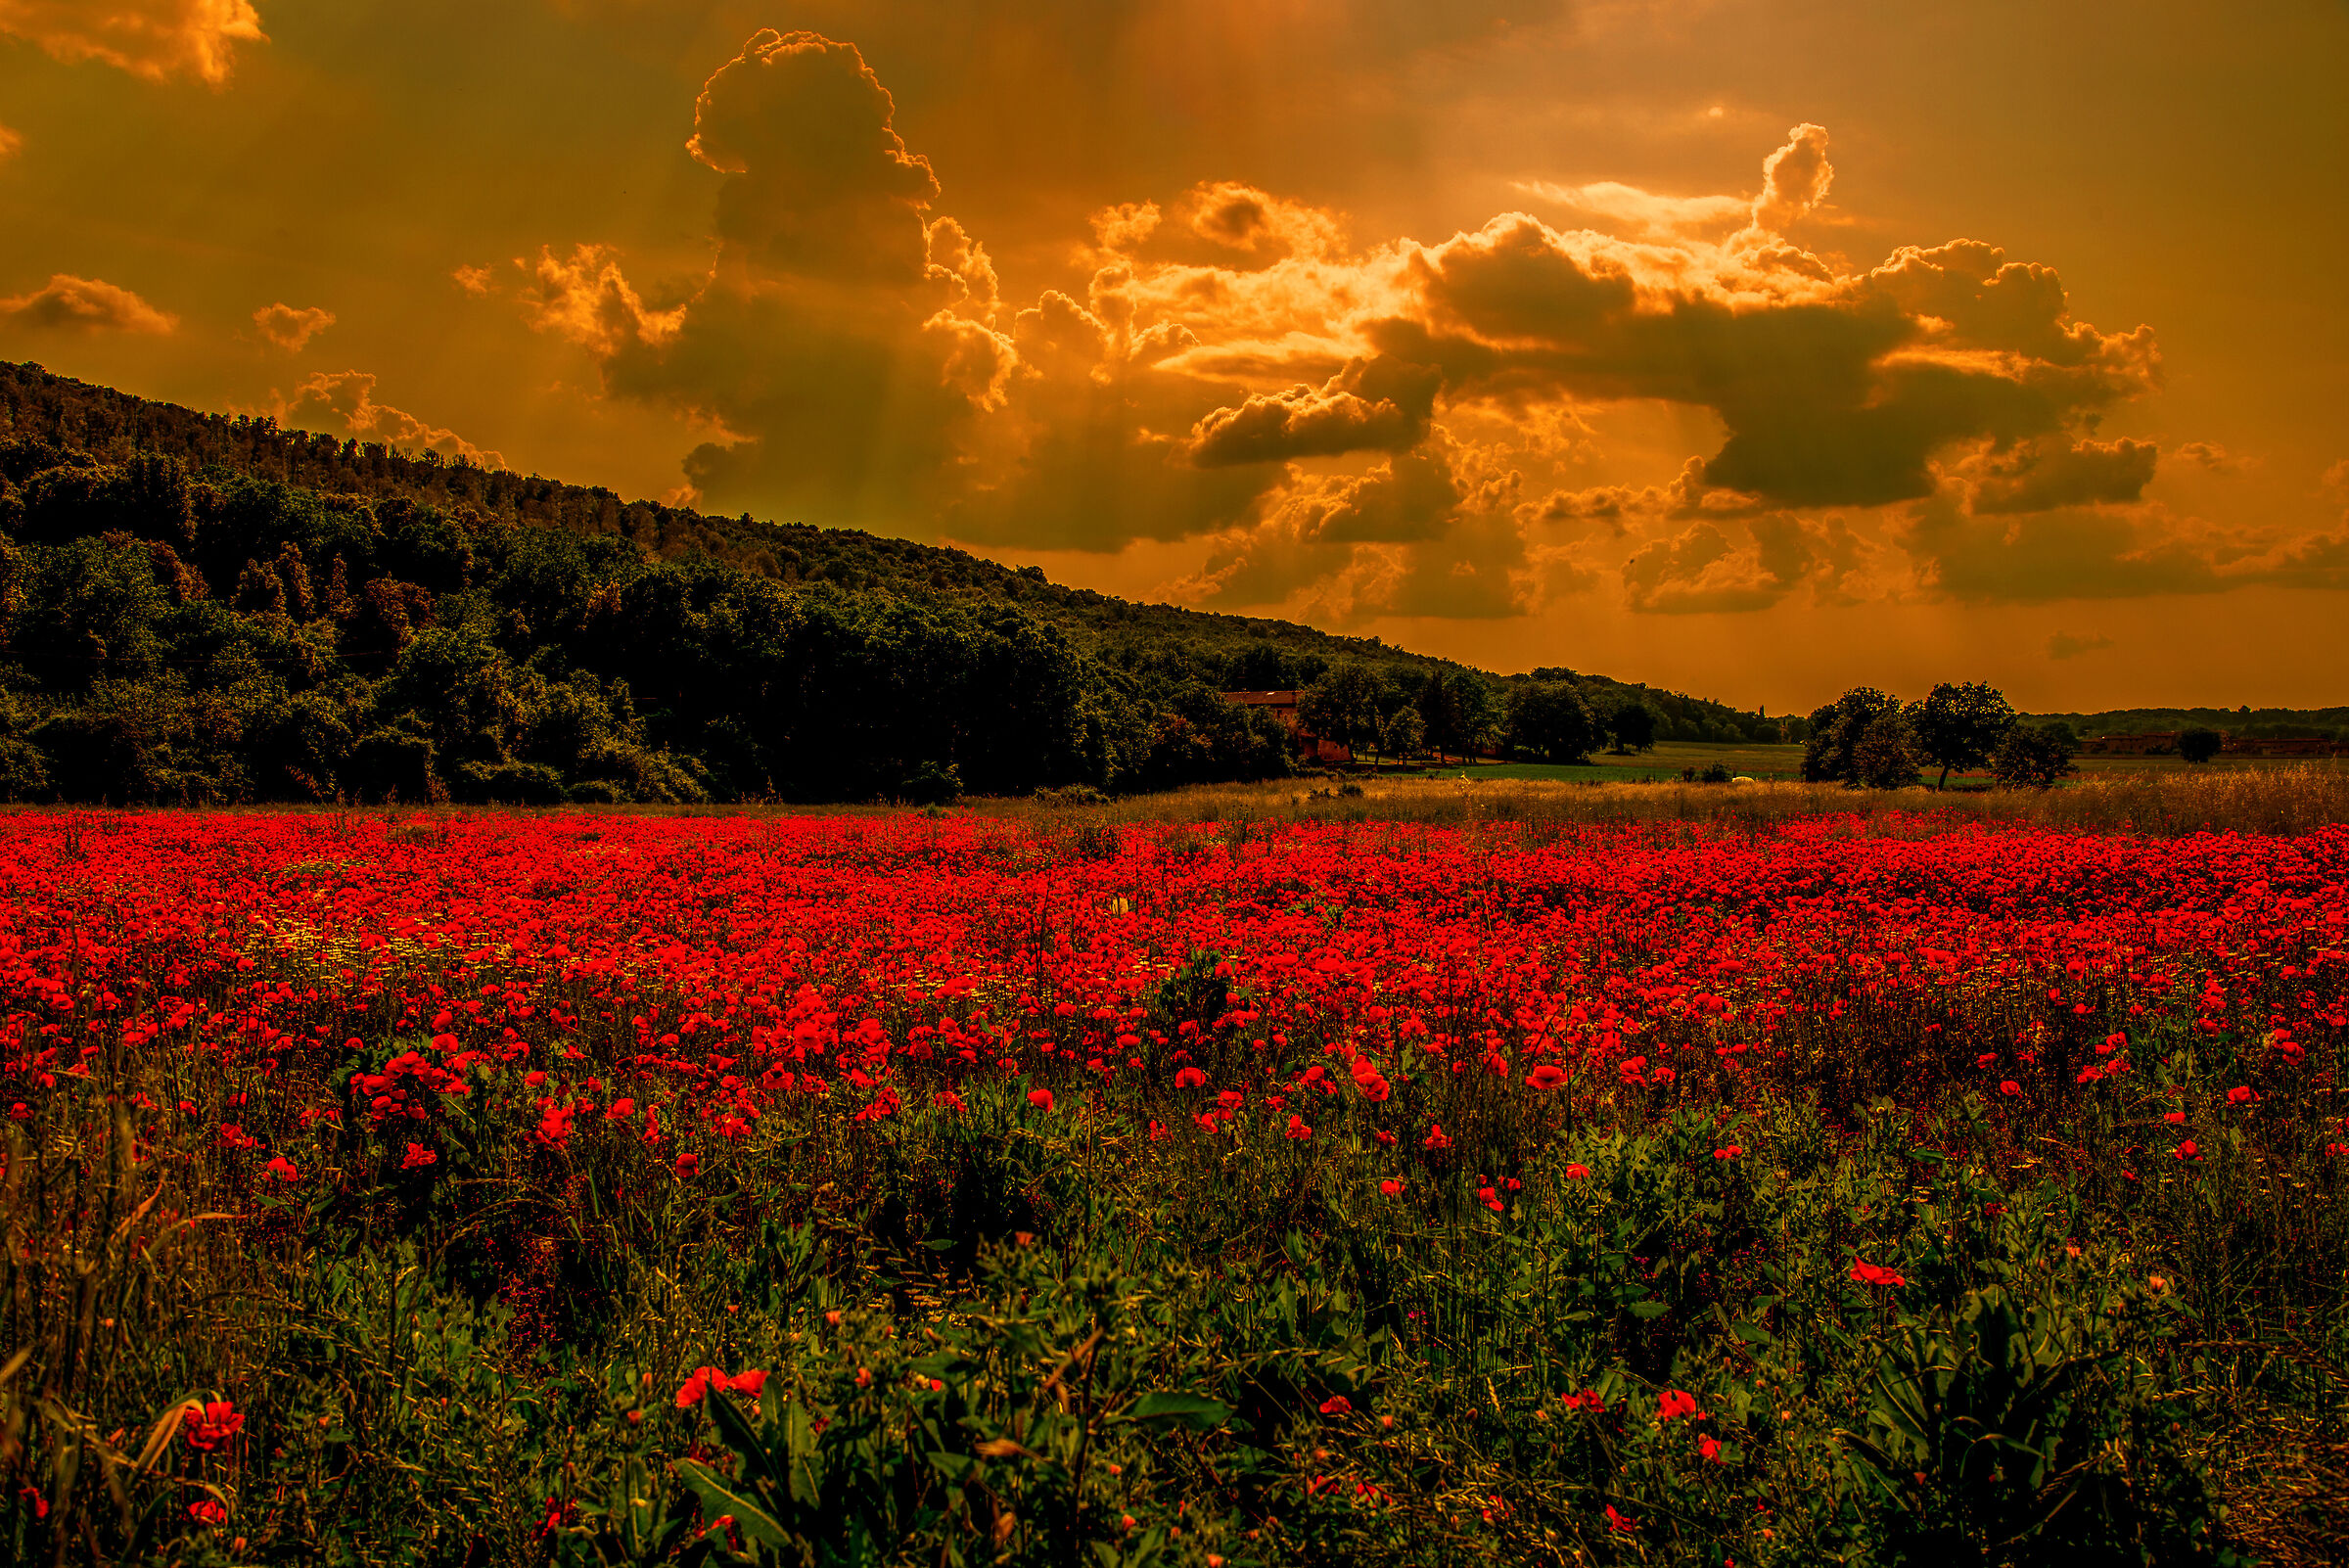 poppies at sunset....